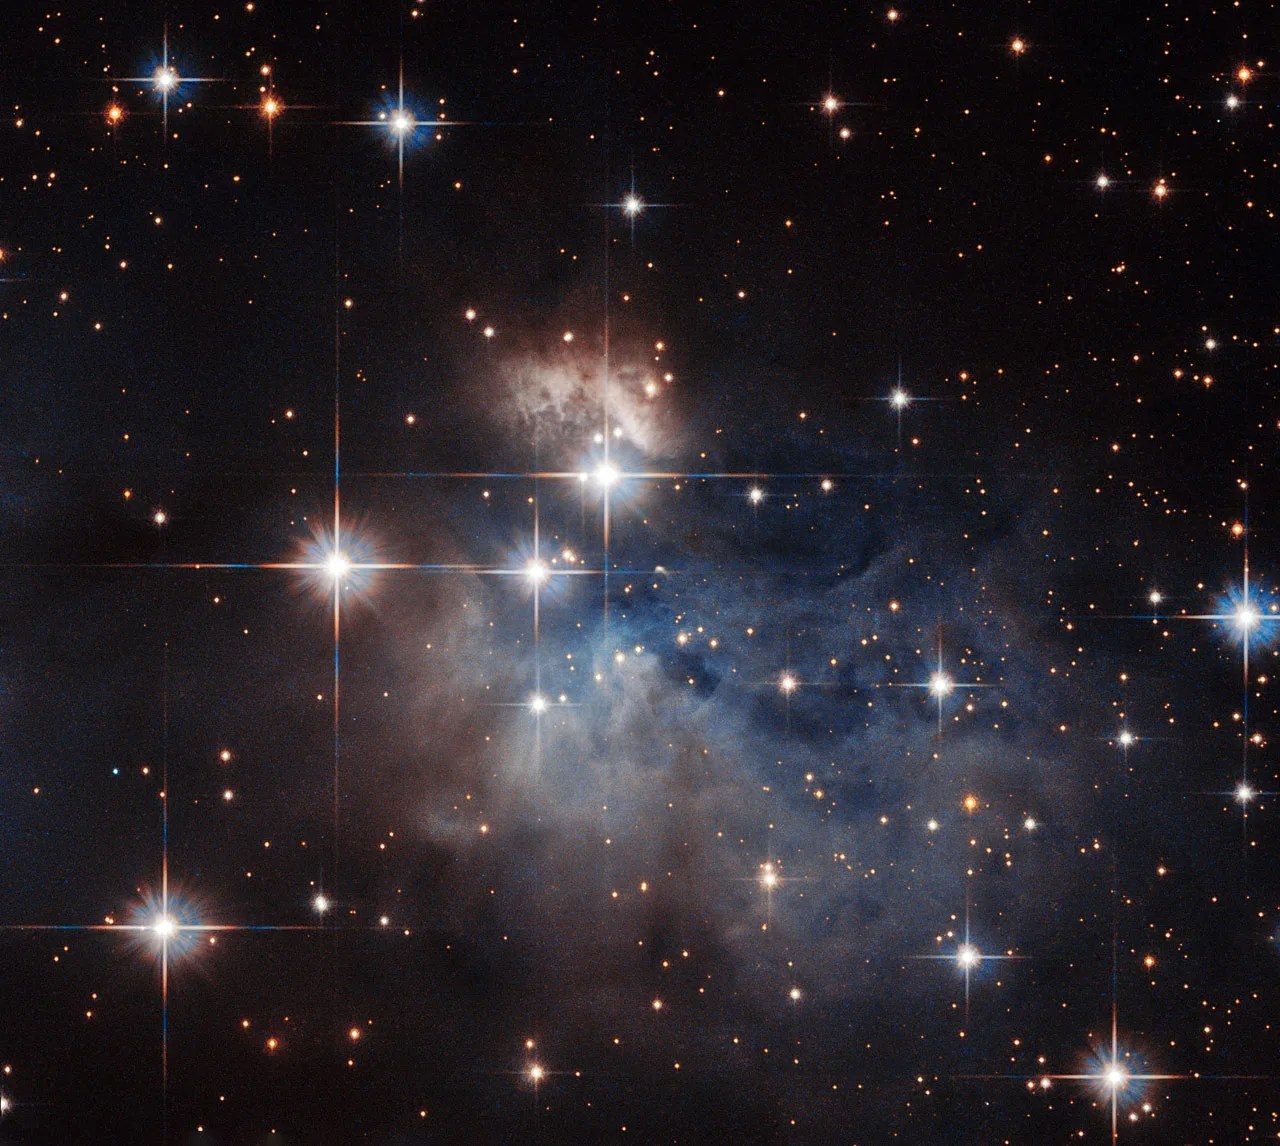 Several stars shine against black space, many of which are visible in the foreground with diffraction spikes. Faint clouds shining in blue, gray, and brown are visible near the center as well.